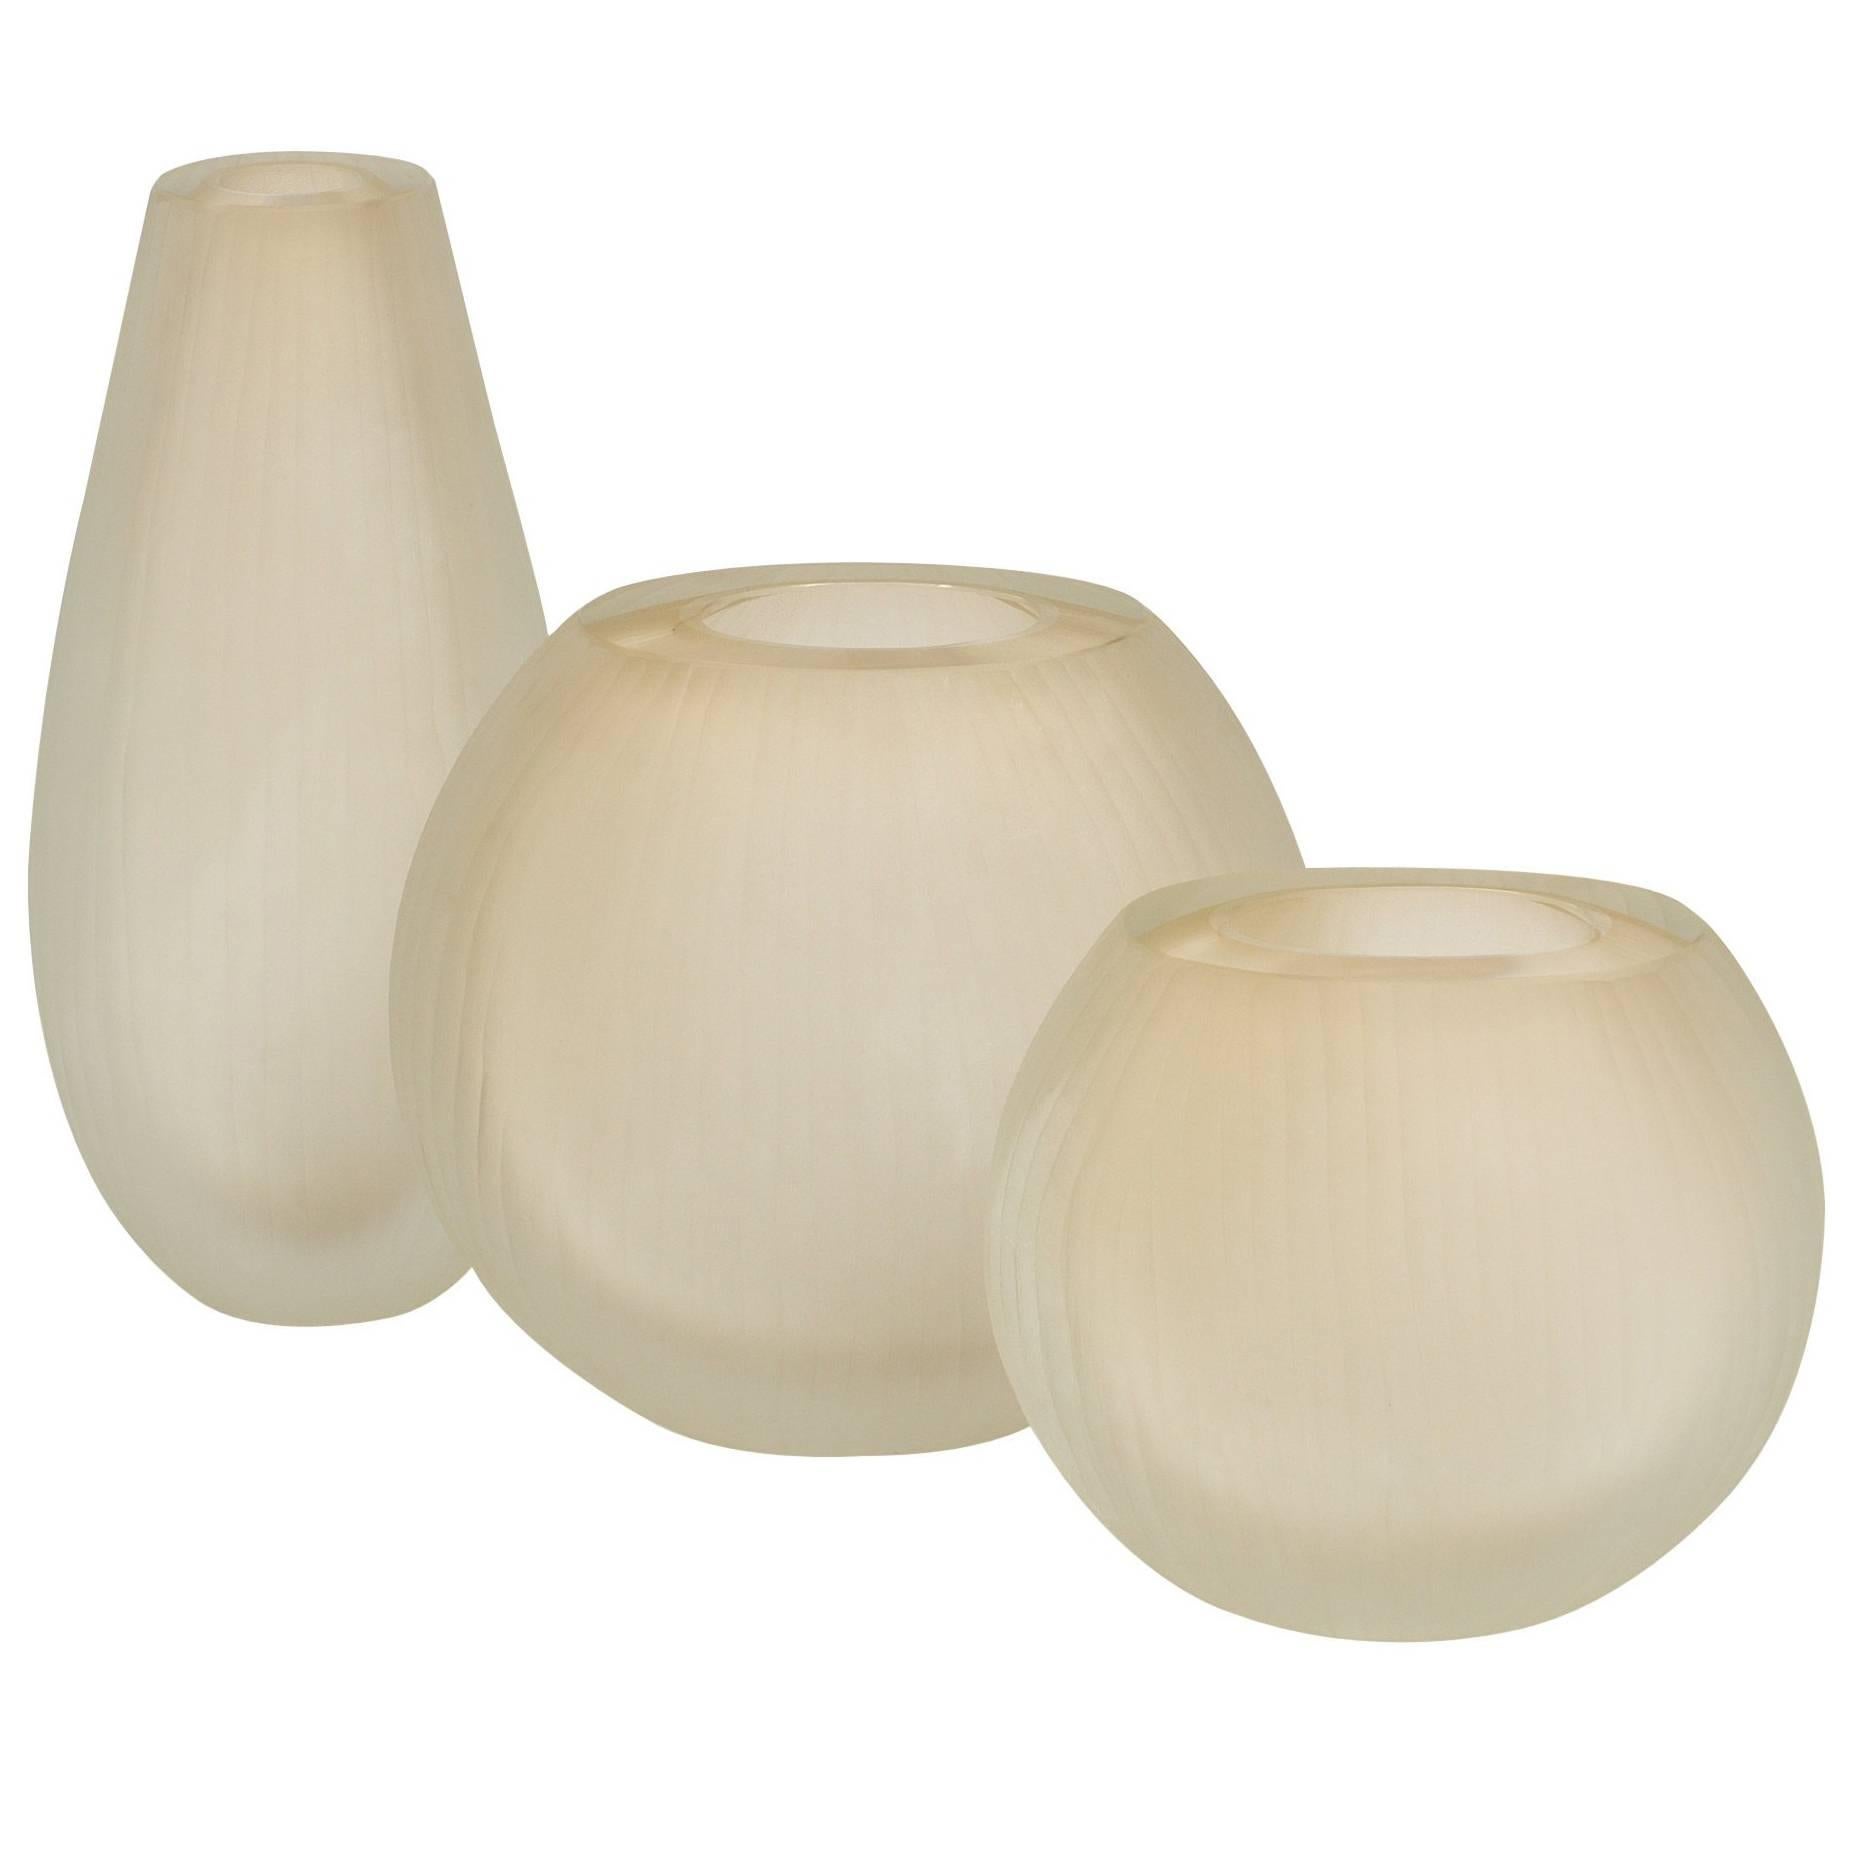 Three Murano Glass Vases in the Tobia Scarpa Style